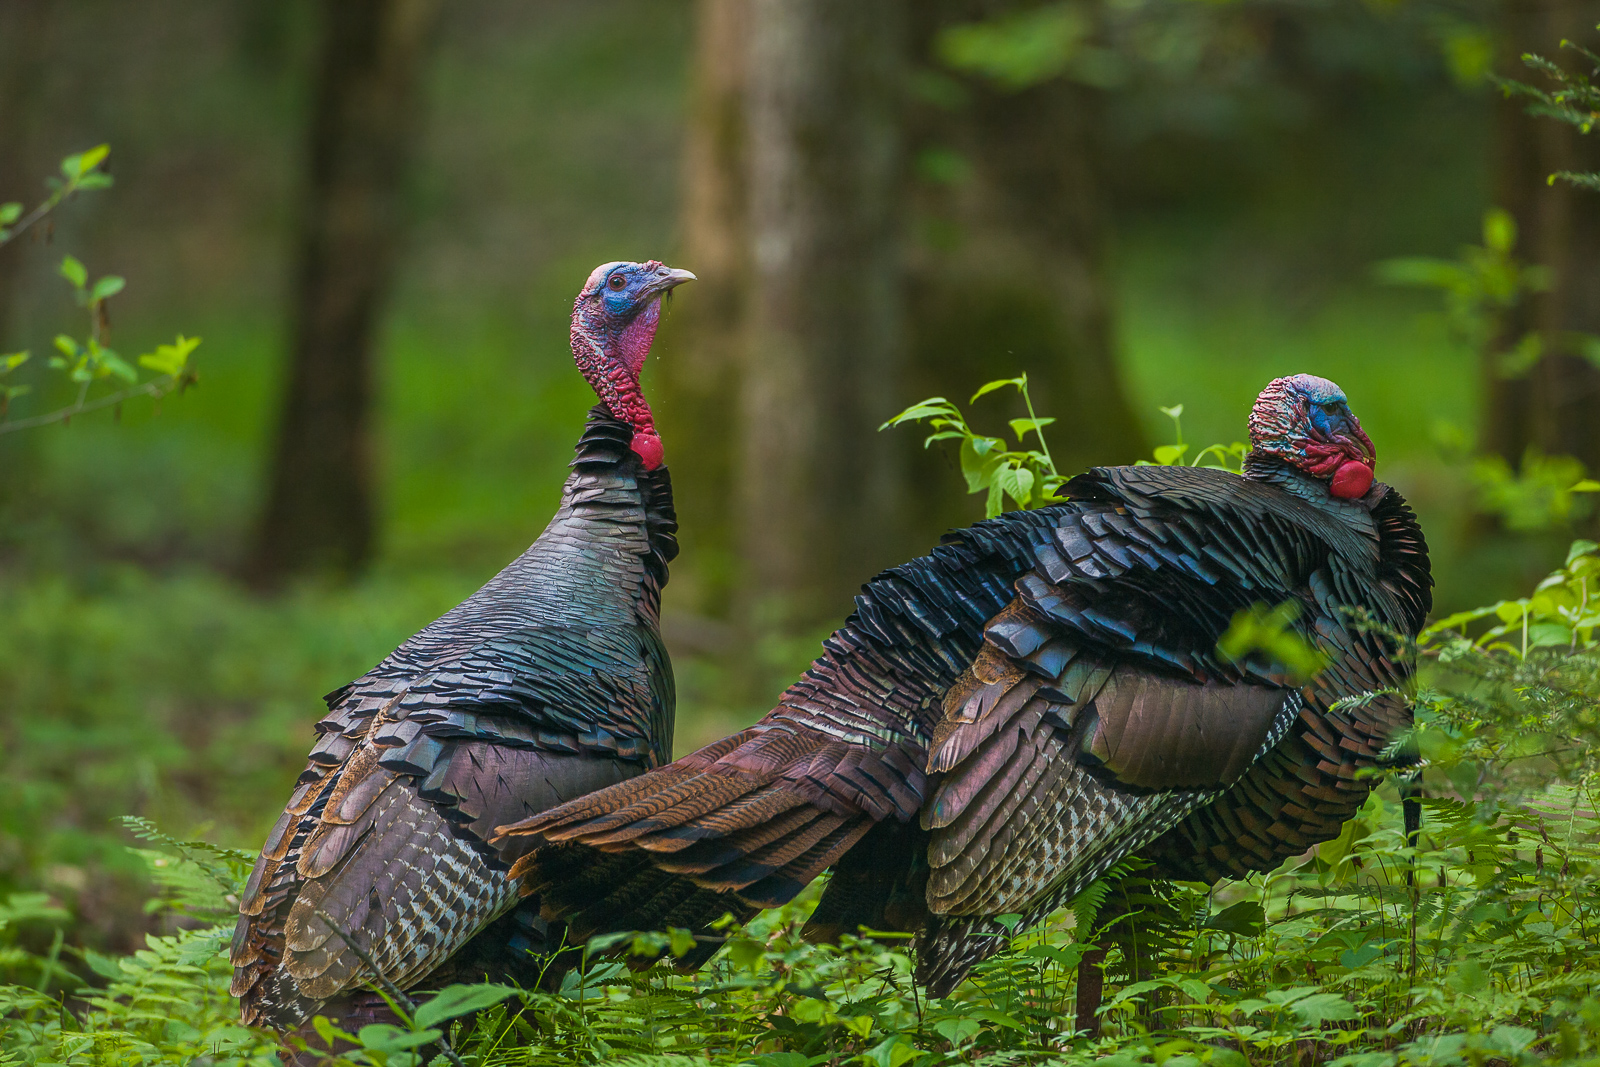 Off the beaten path this pair of Wild Turkeys linger in the woods of Smoky Mountains National Park.